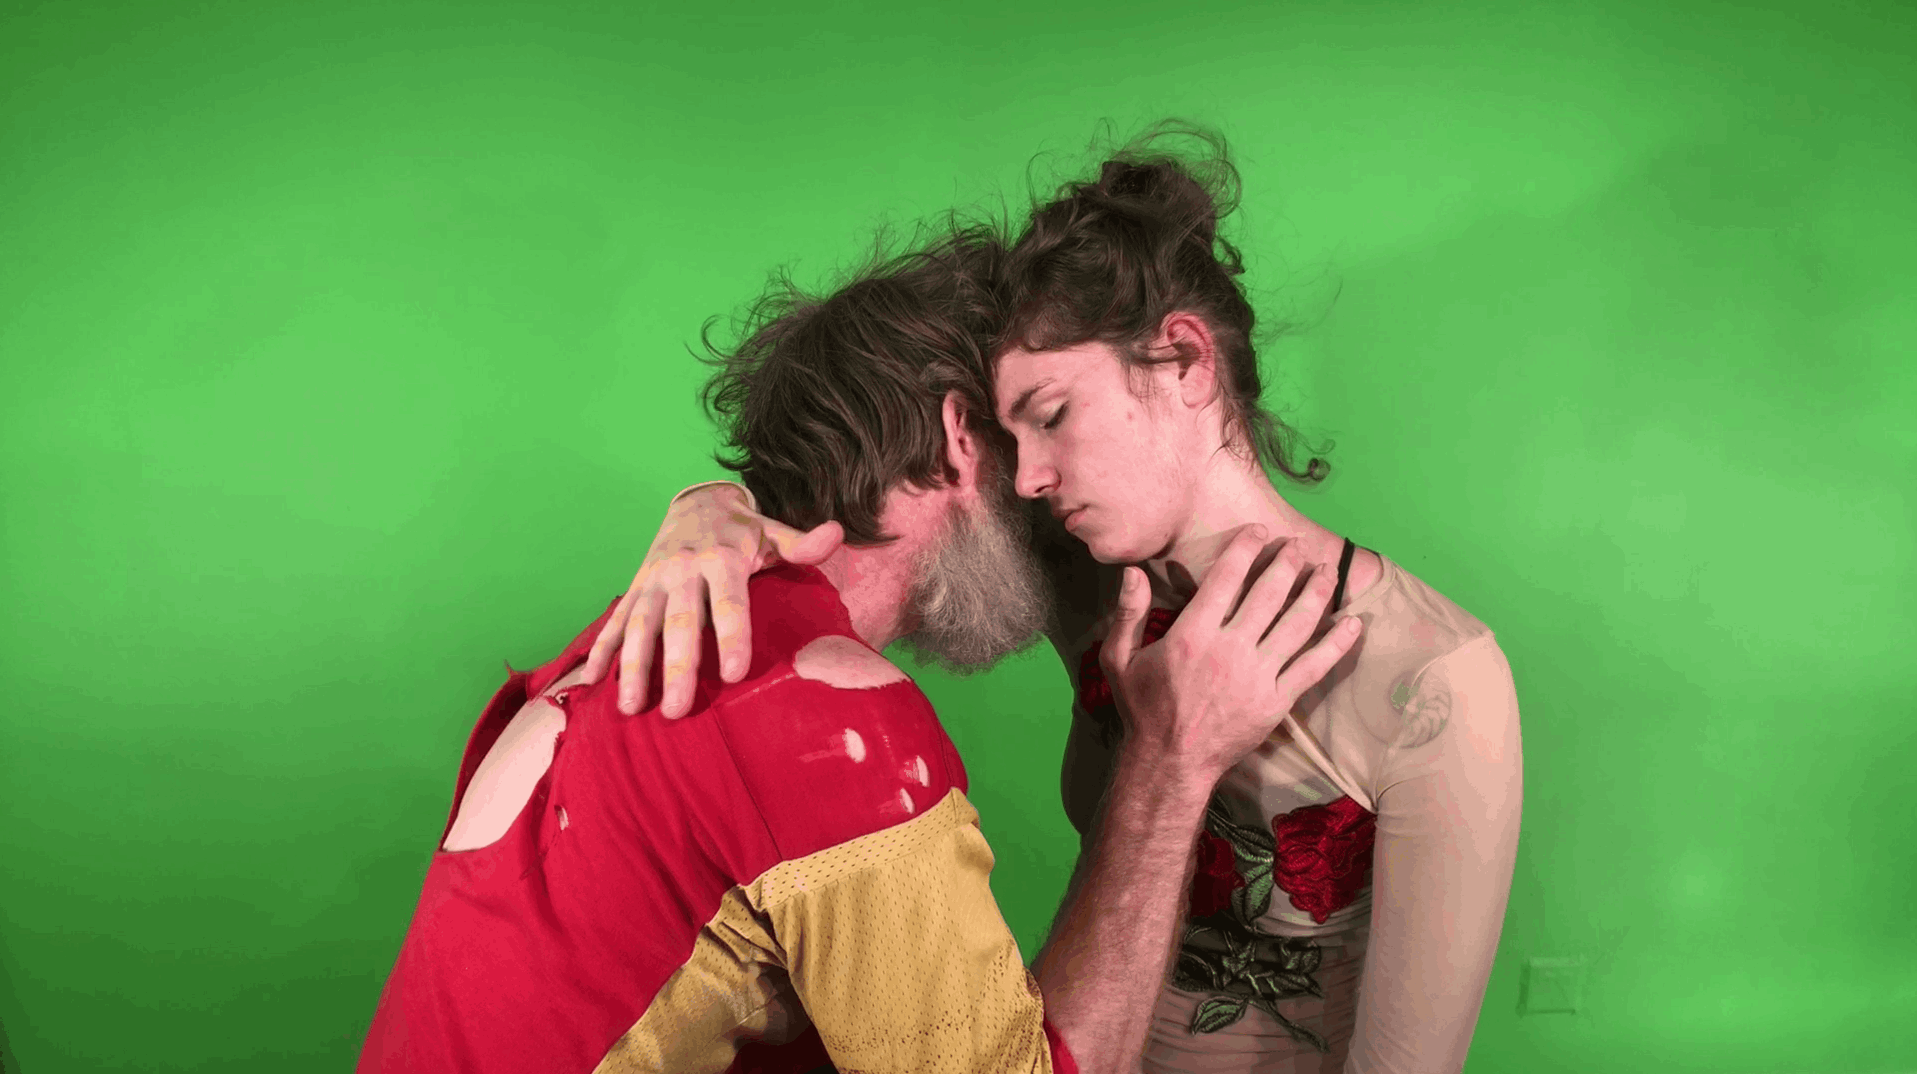 Embrace in front of greenscreen.